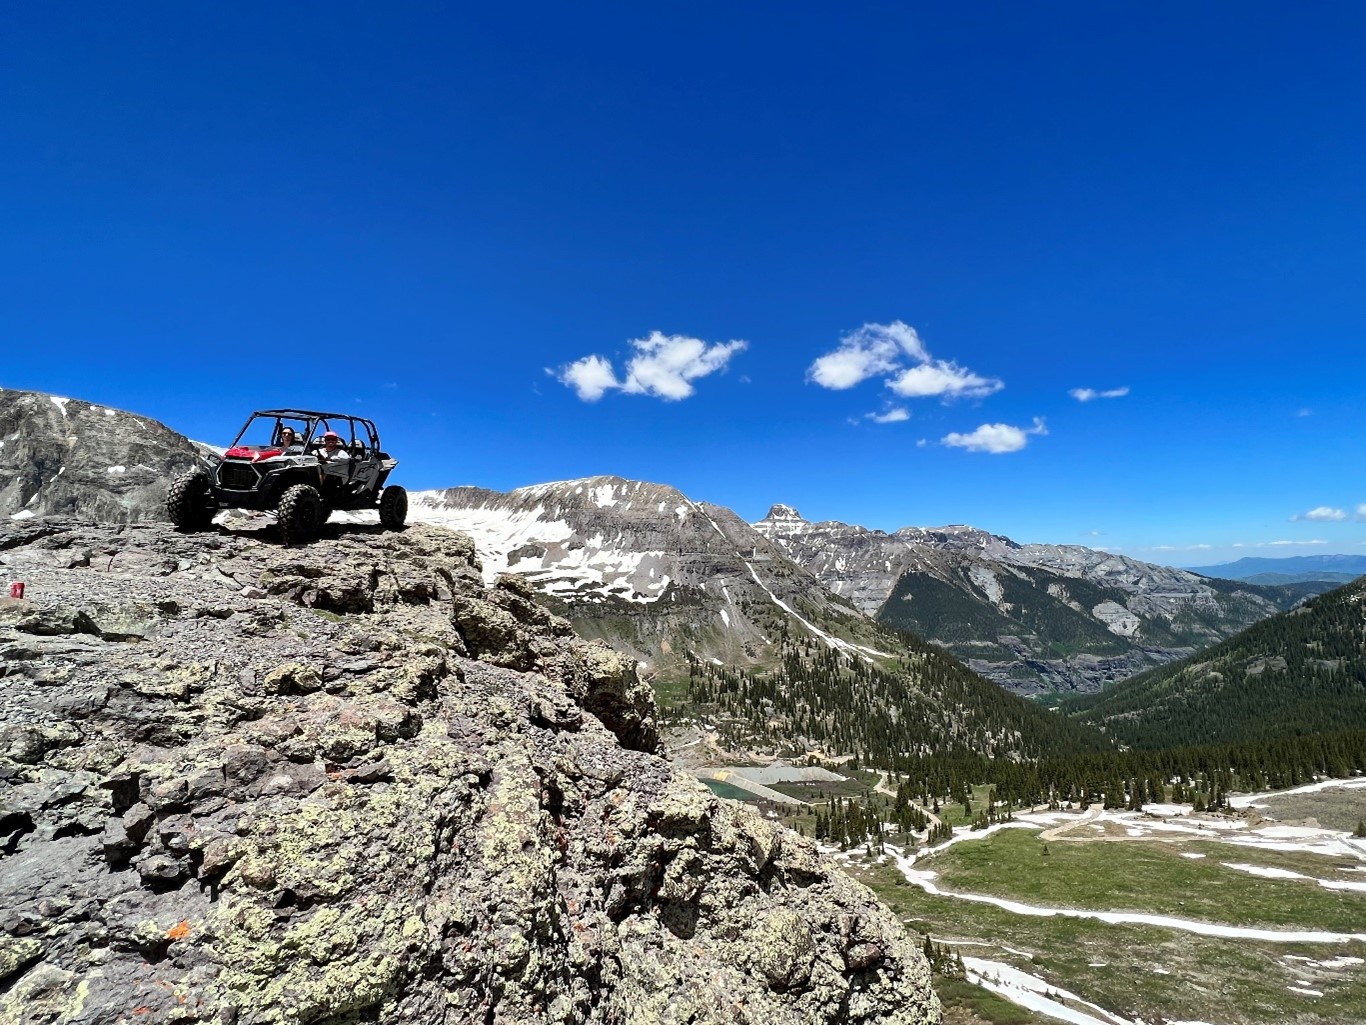 Off-roading in beautiful Ouray, Colorado.